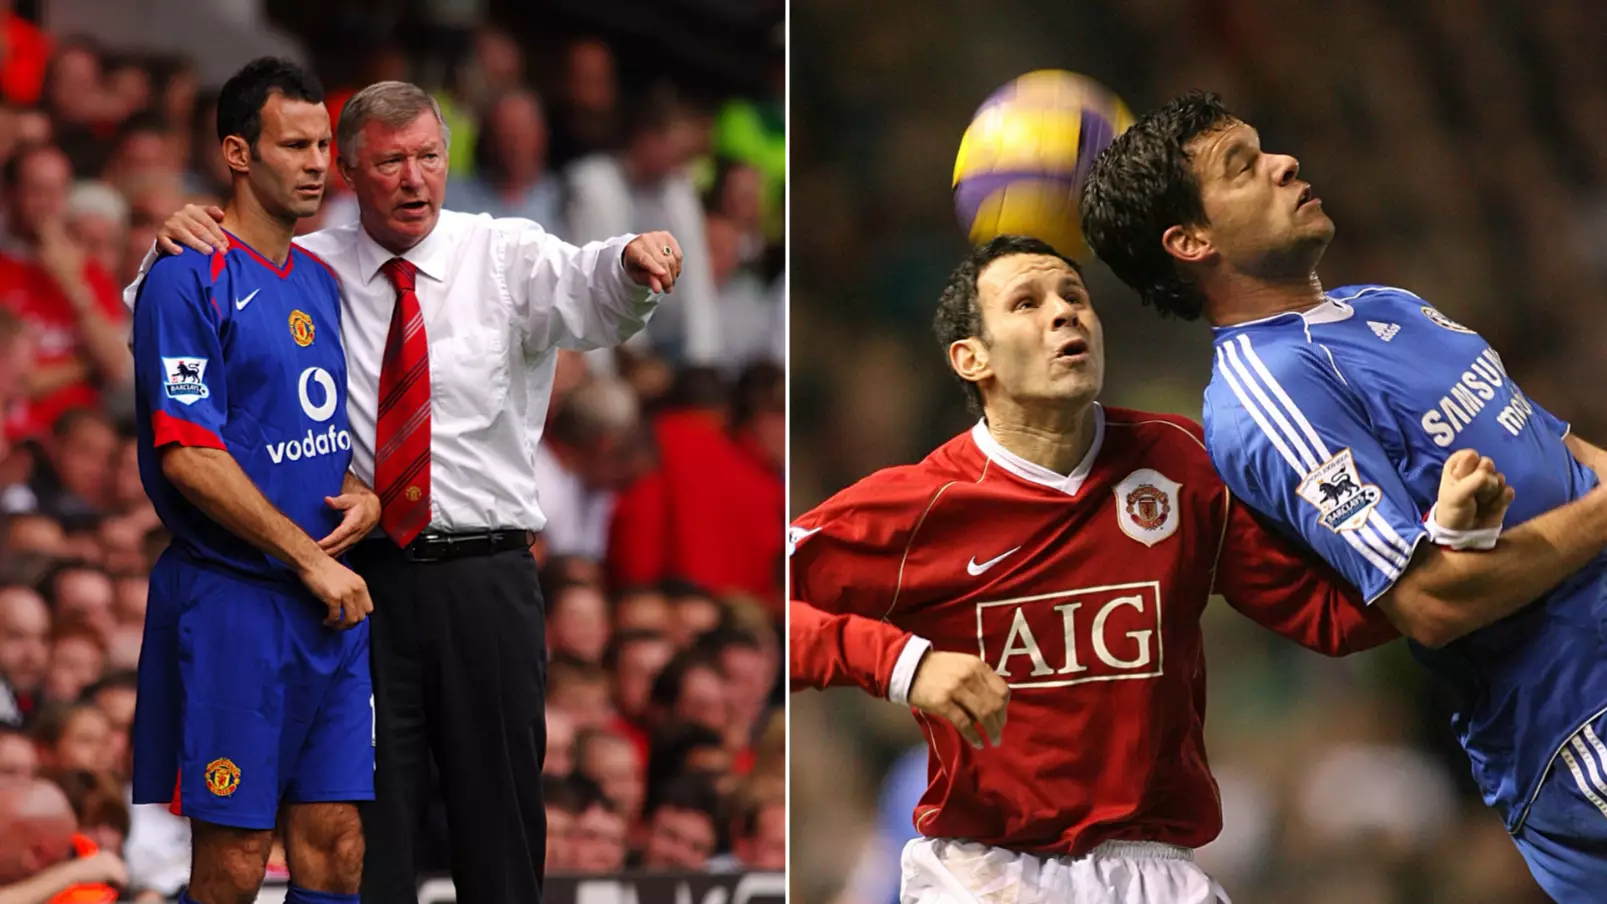 Sir Alex Ferguson Told Ryan Giggs To 'Forget' About Upcoming Five Games So He Could Prepare For Michael Ballack